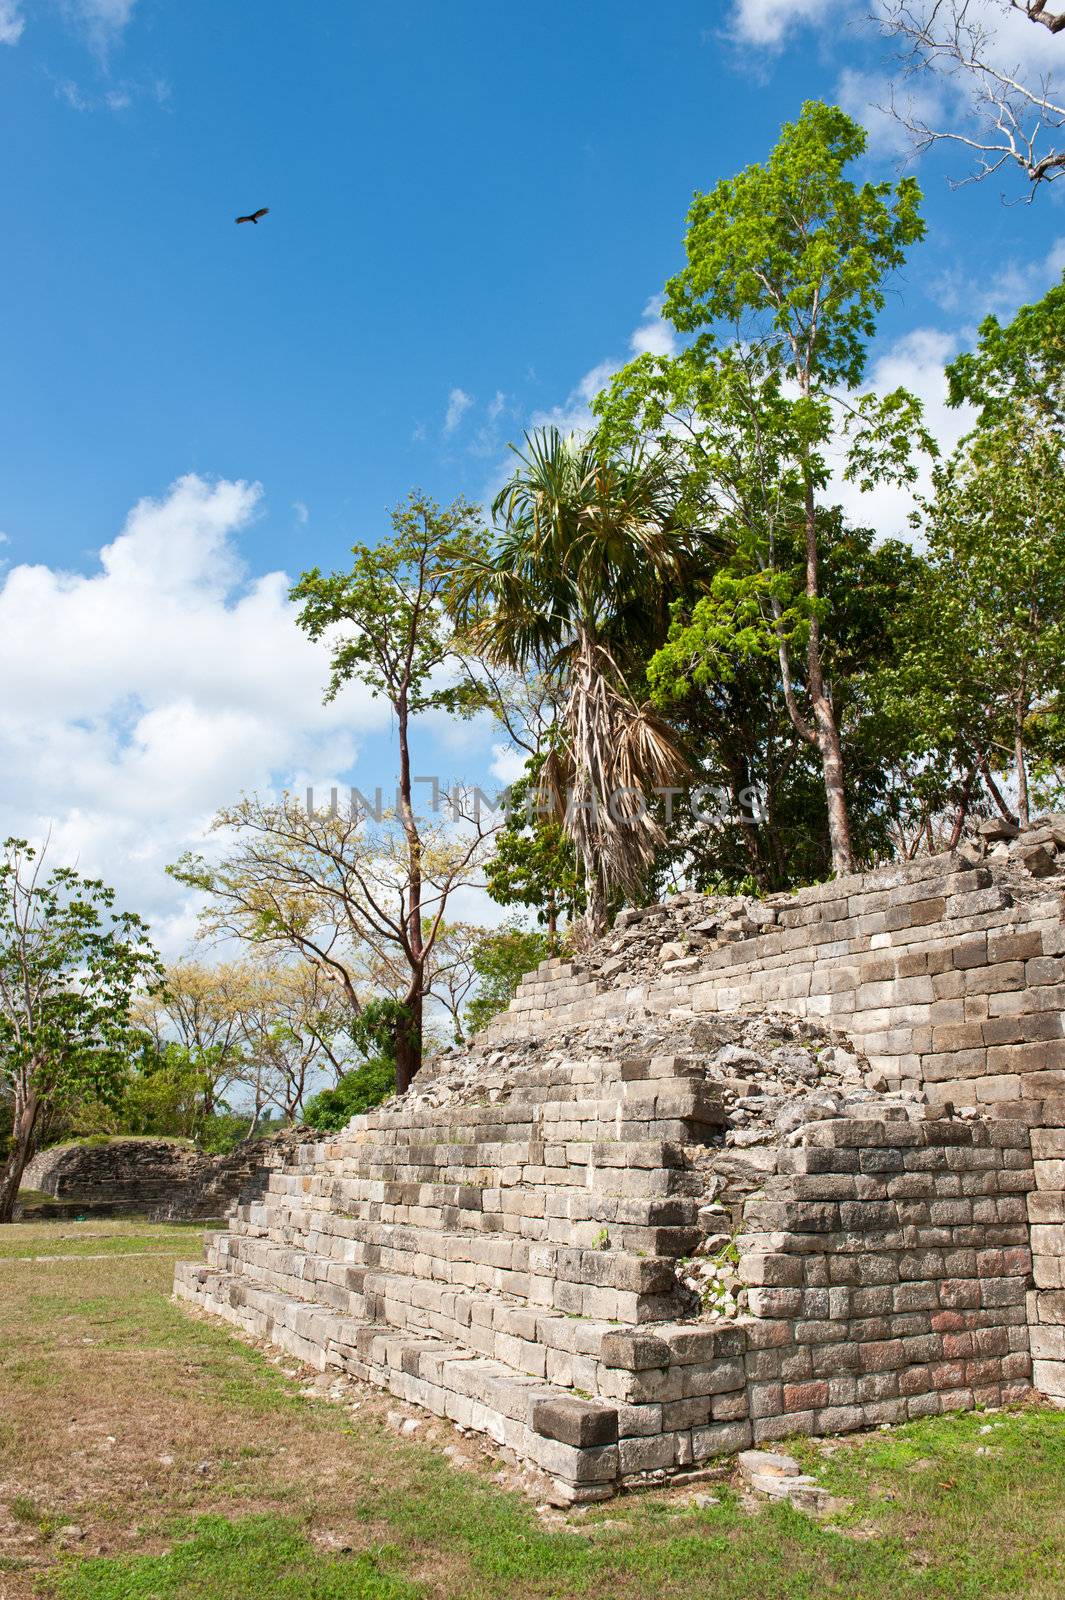 Maya temple in the ancient city of Lubaantum, southern Belize. Central America.